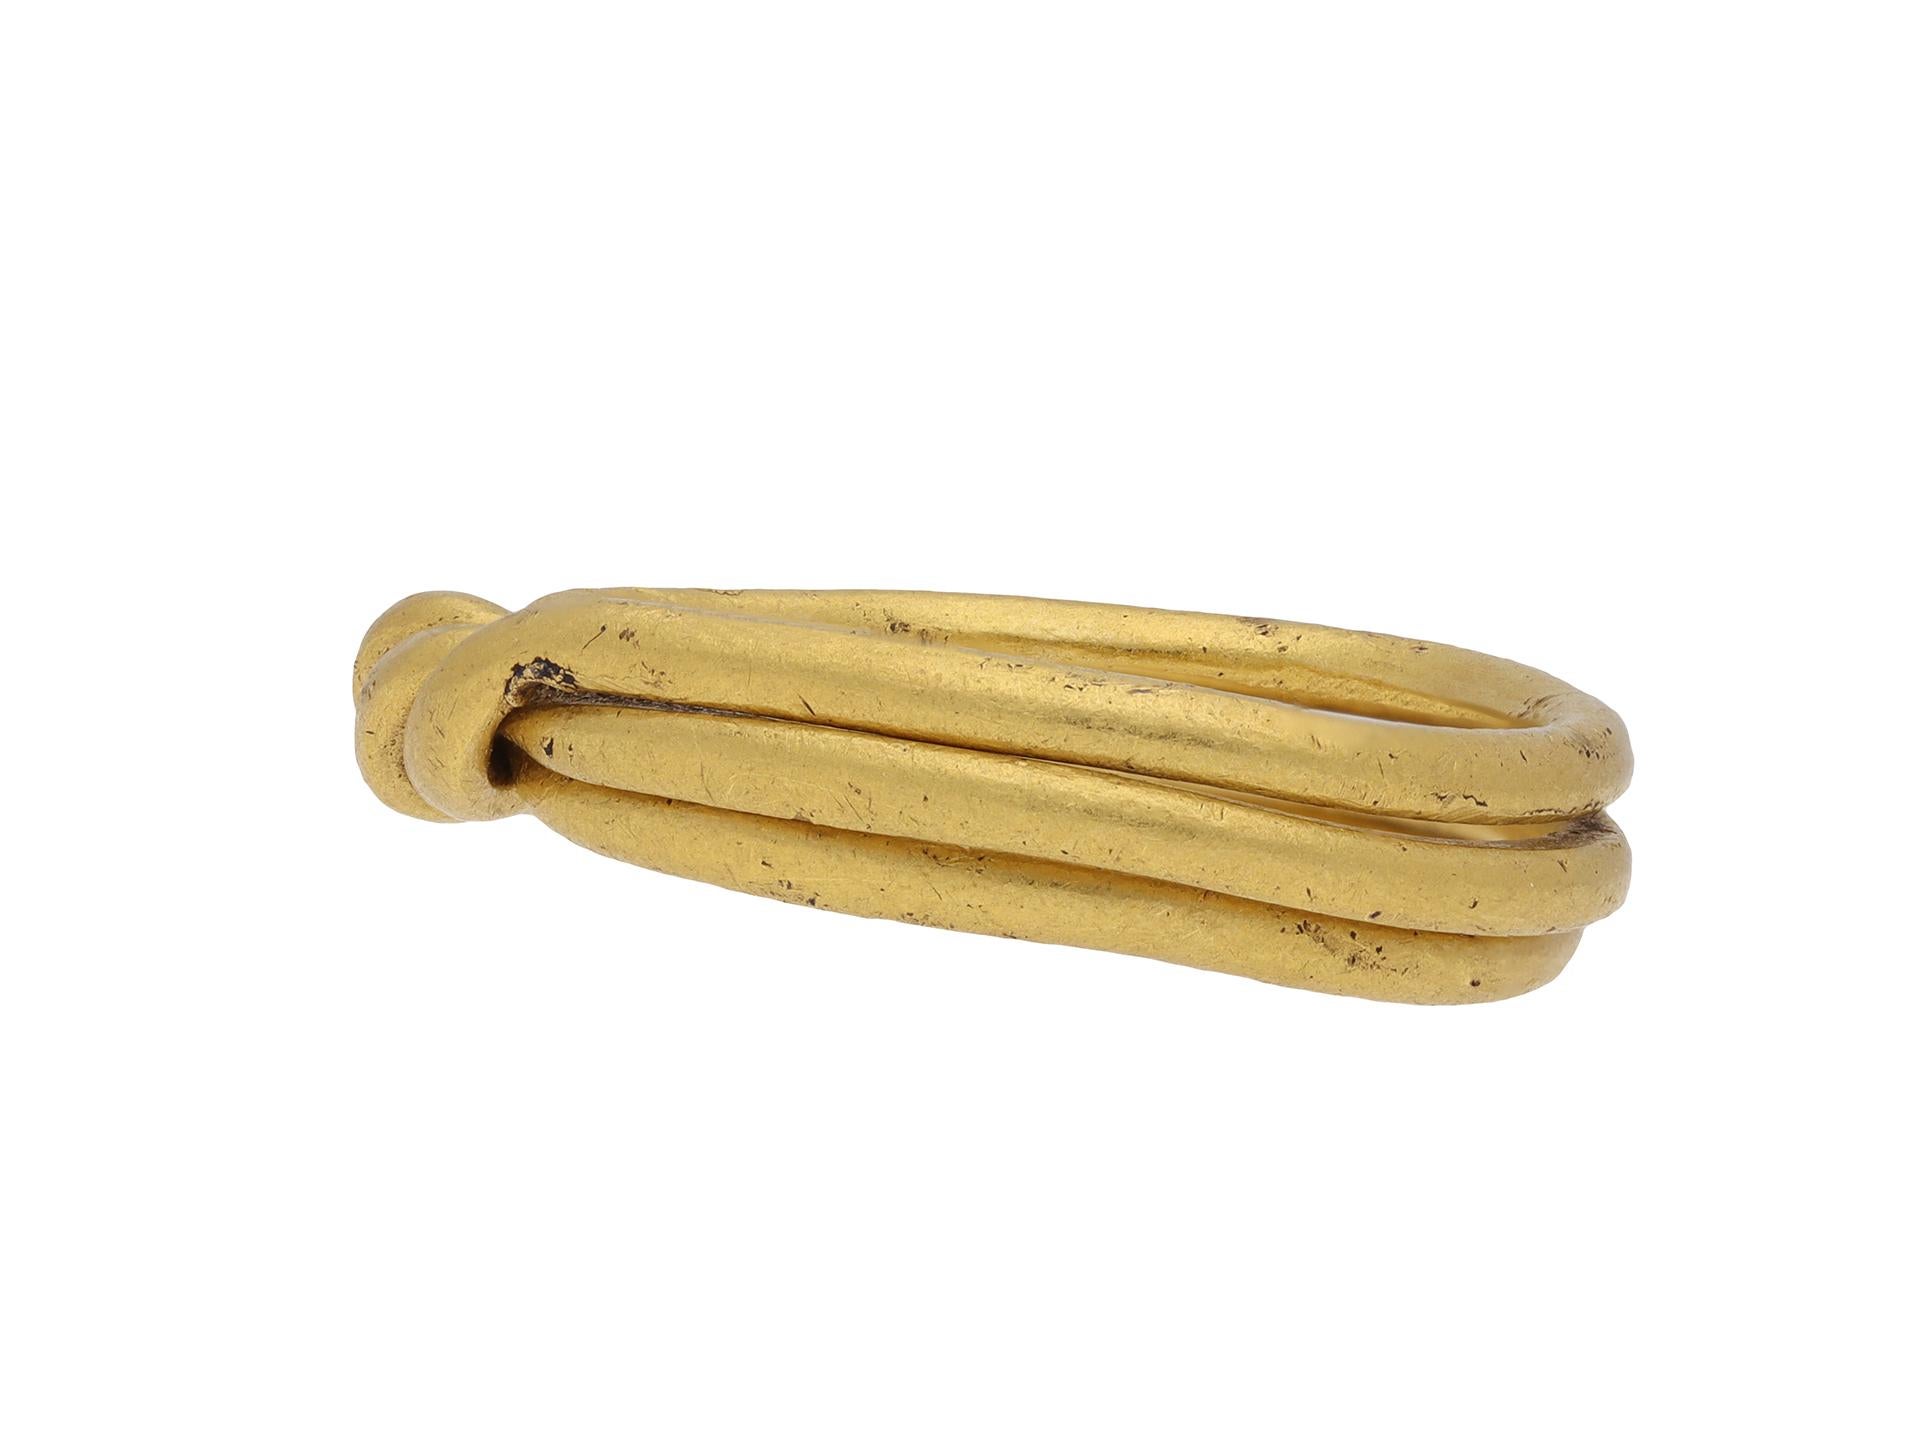 Post Medieval gold puzzle ring. A gold puzzle ring consisting of three interlinked hooped sections featuring a twist to top, the three sections can be twisted together to form a coiled metalwork design. Tested yellow gold, approximately 6.1 grams in